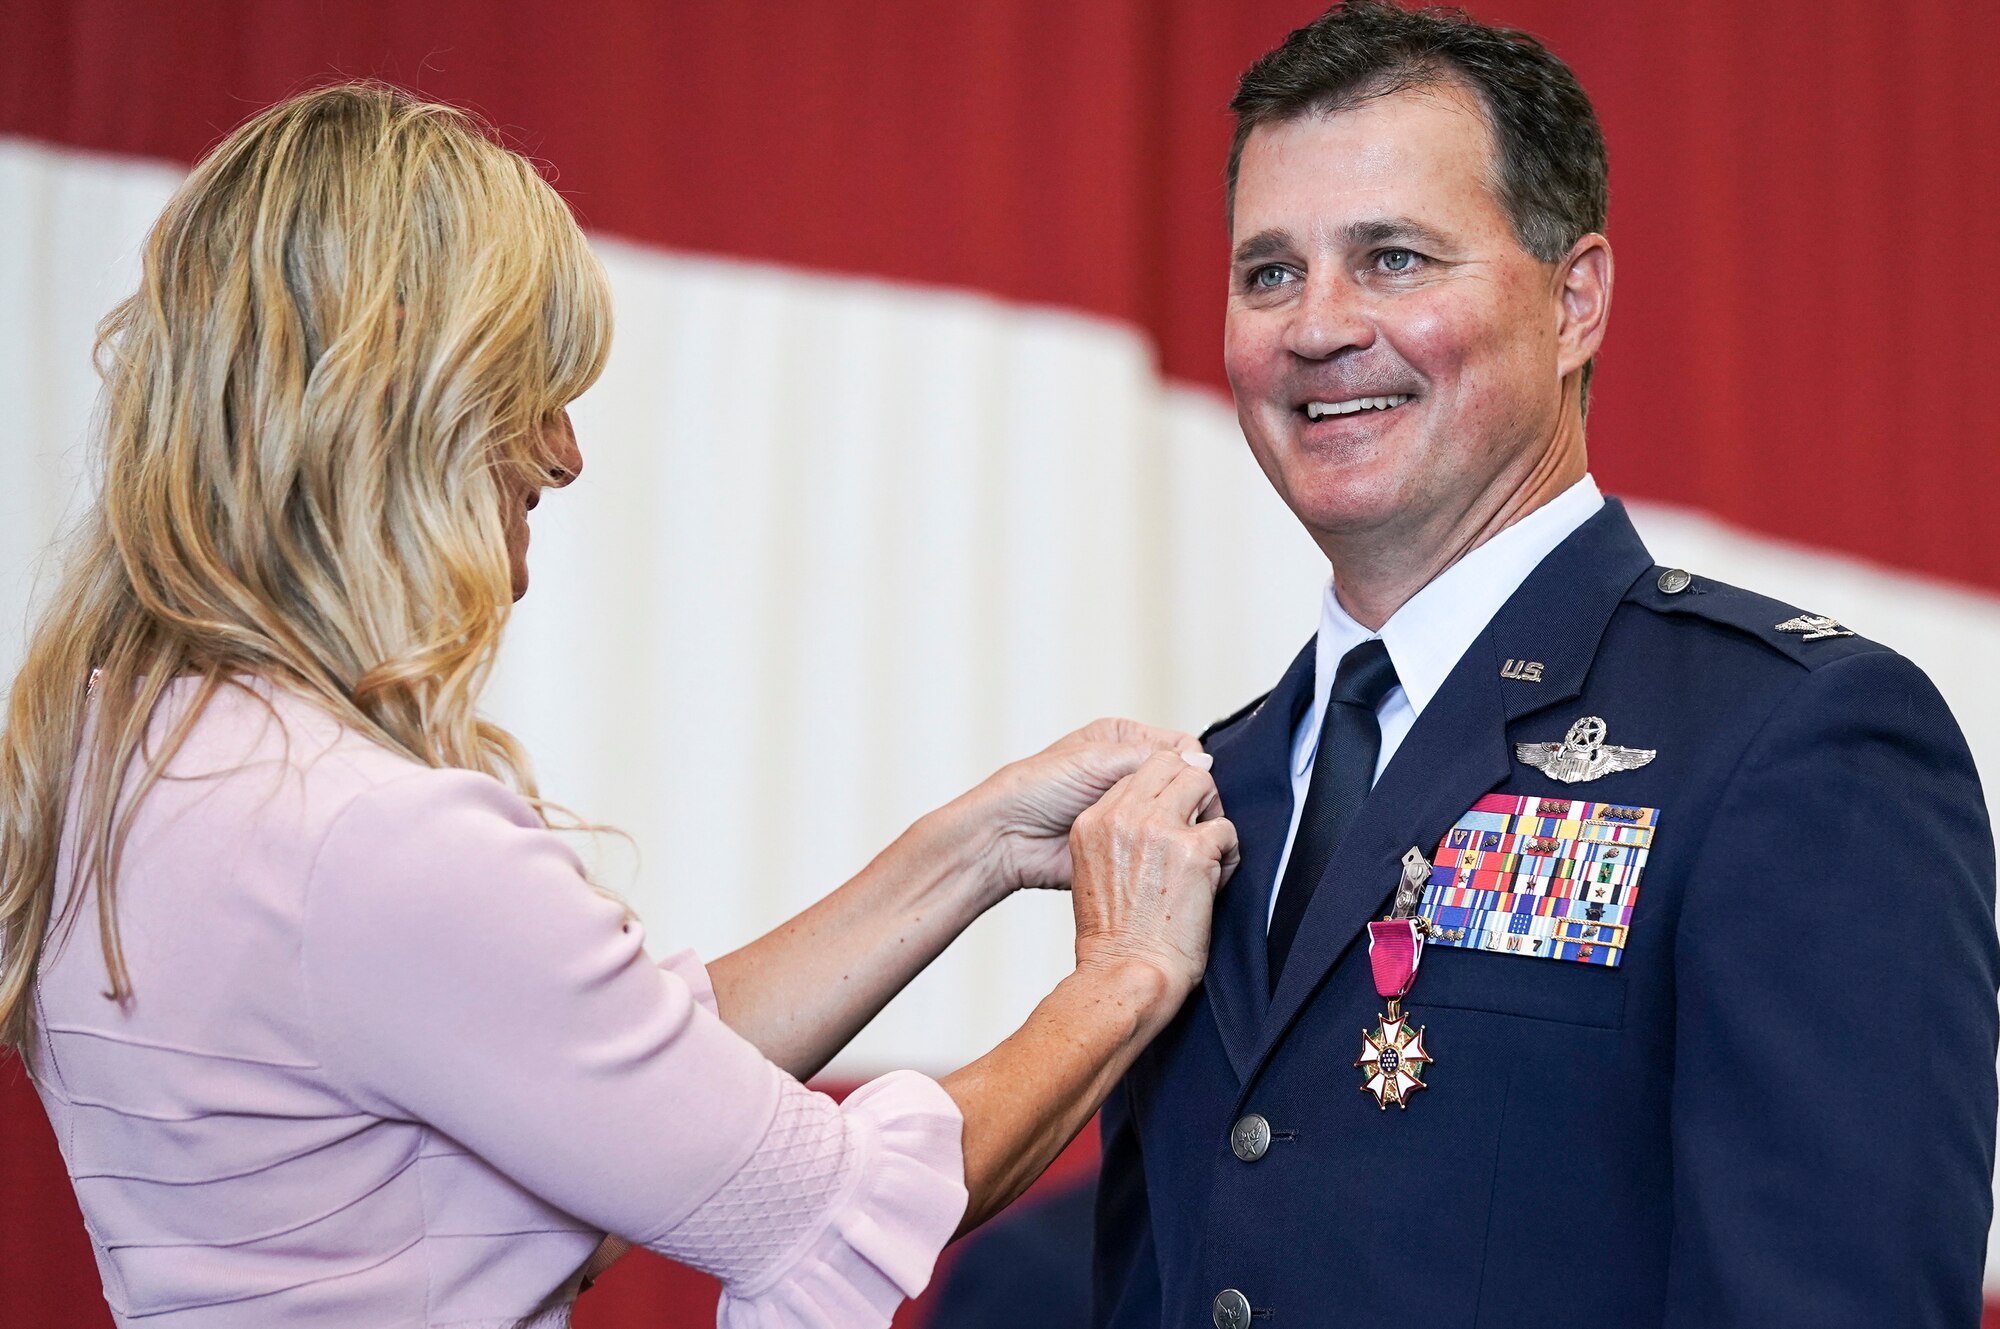 Col. Devin R. Wooden, former 137th Special Operations Wing commander, receives a retirement pin from his wife, Kelly Wooden, during his retirement ceremony at Will Rogers Air National Guard Base, May 5, 2019. Wooden spent his entire career, nearly 33 years, promoting from Airman 1st Class to Colonel in the Oklahoma Air National Guard. (U.S. Air National Guard photo by Staff Sgt. Tyler Woodward)